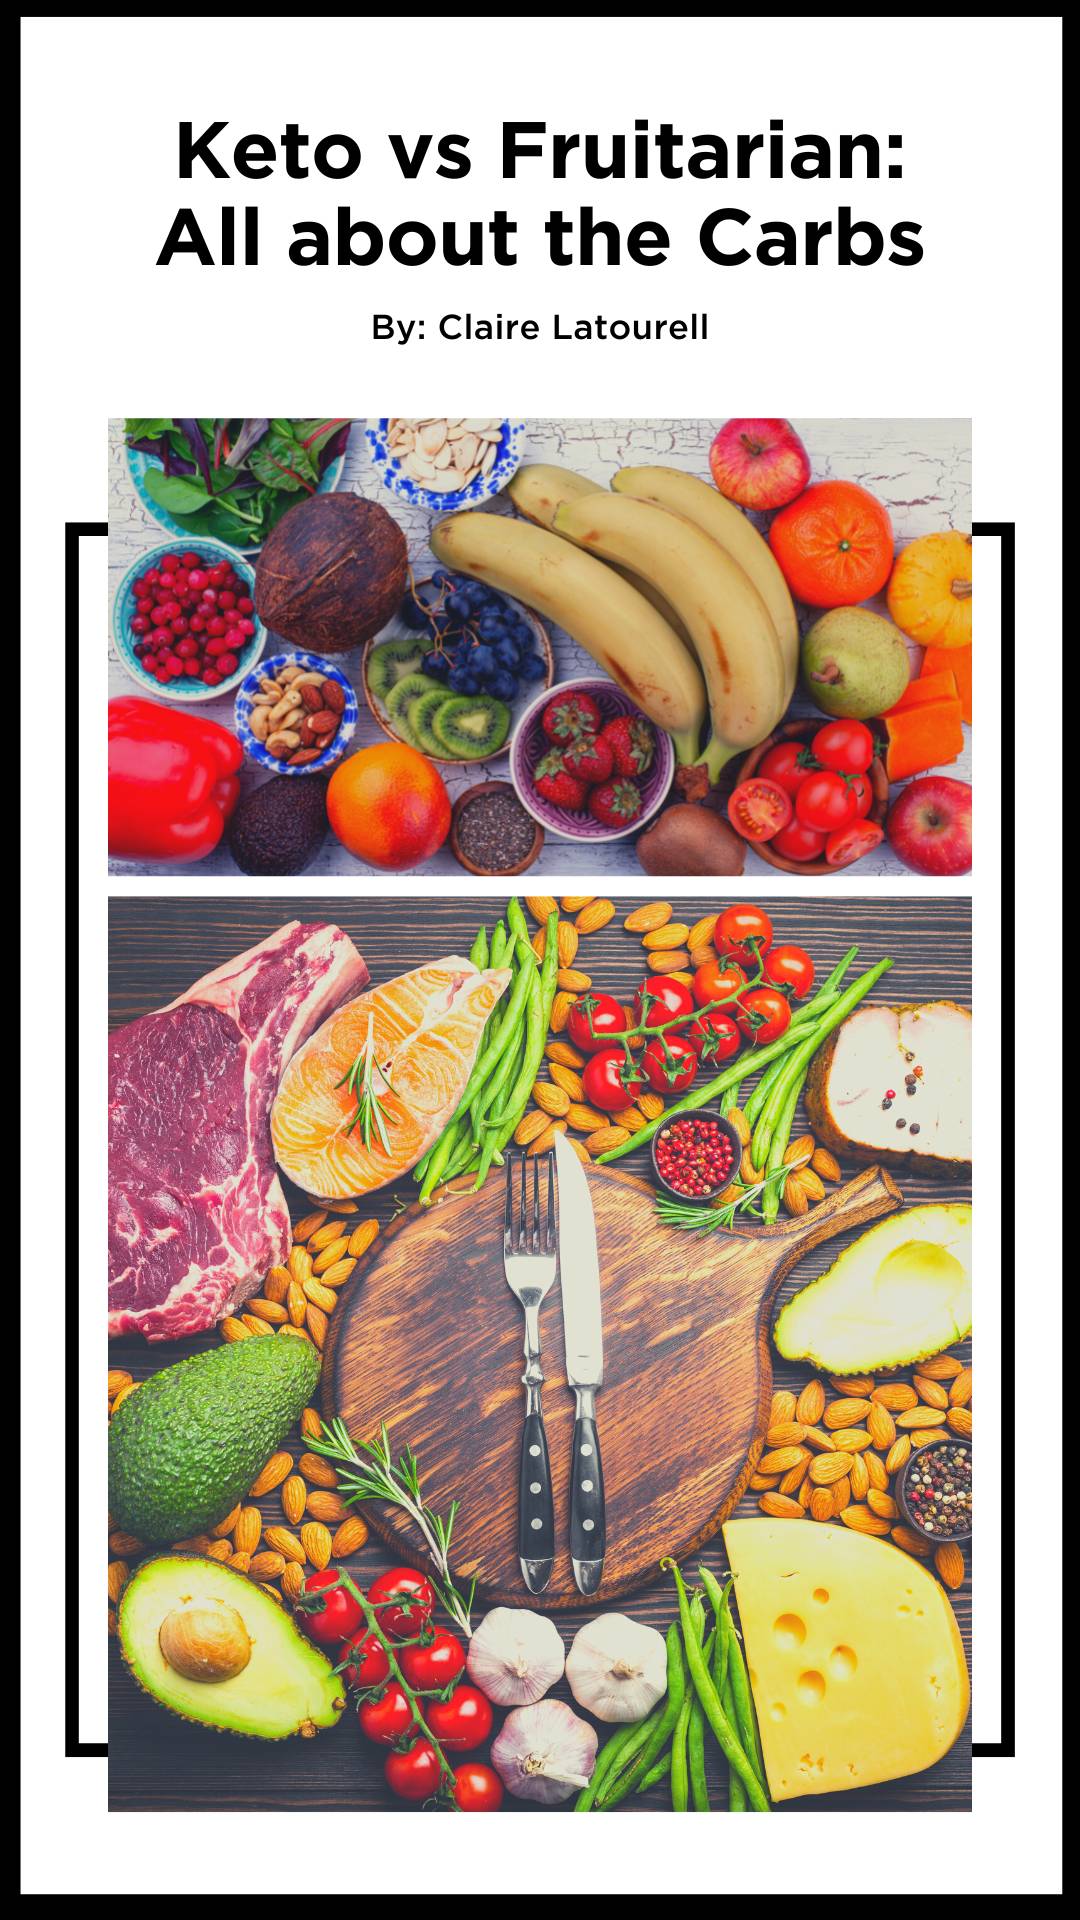 Image of fruits, veggies and meats and title that says